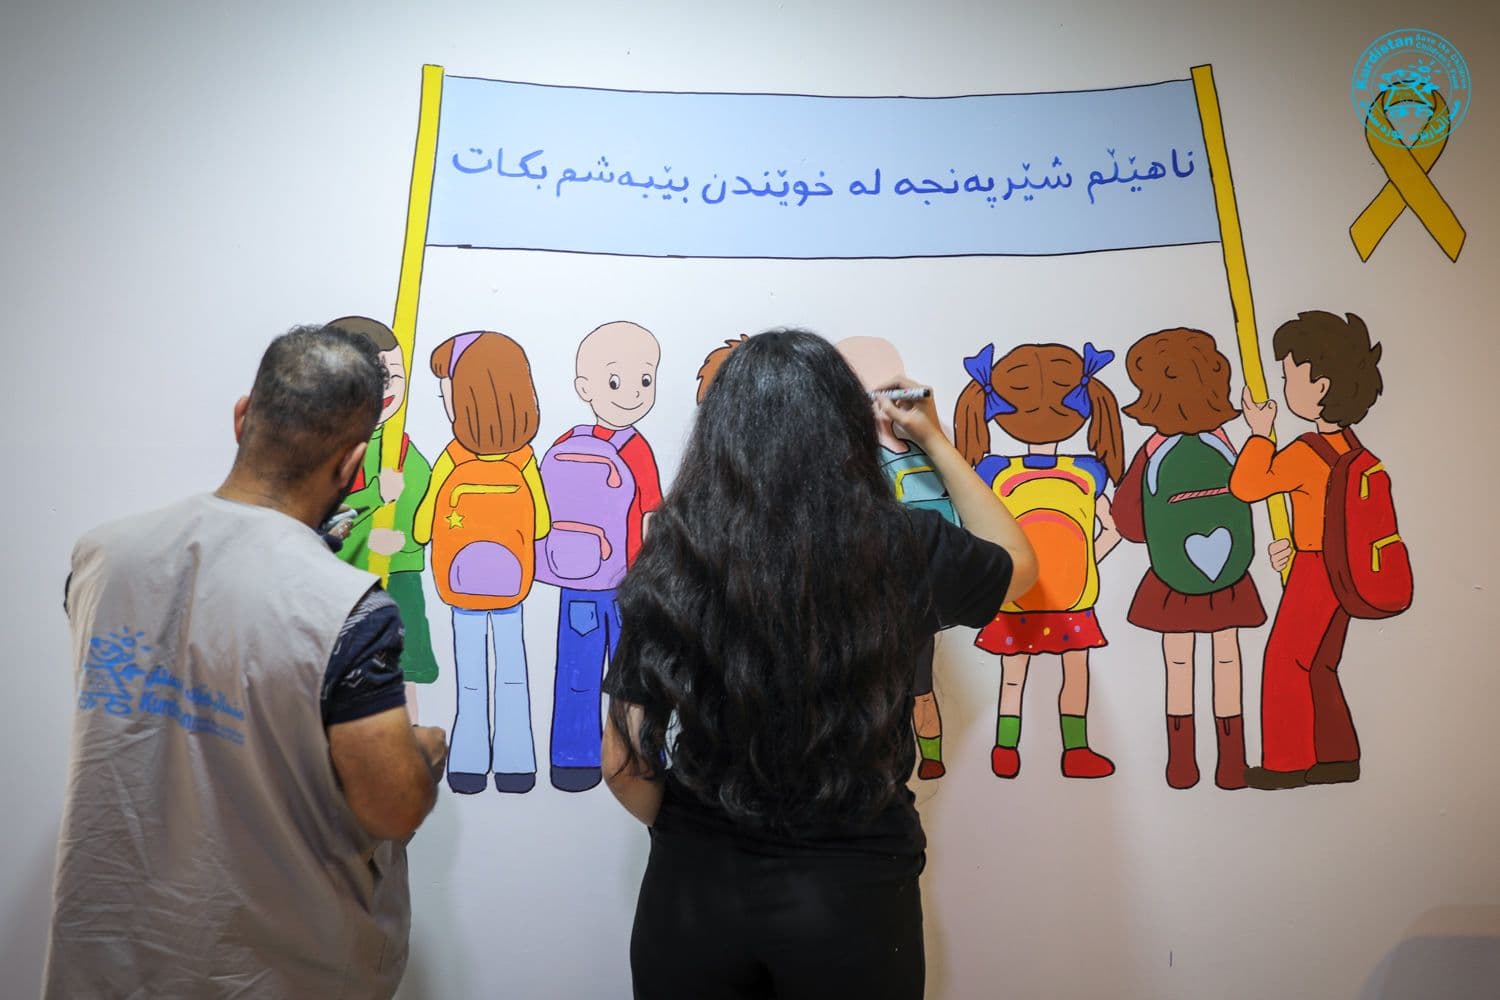 Awareness Inspiring Artwork in Health Facilities about Childhood Cancer